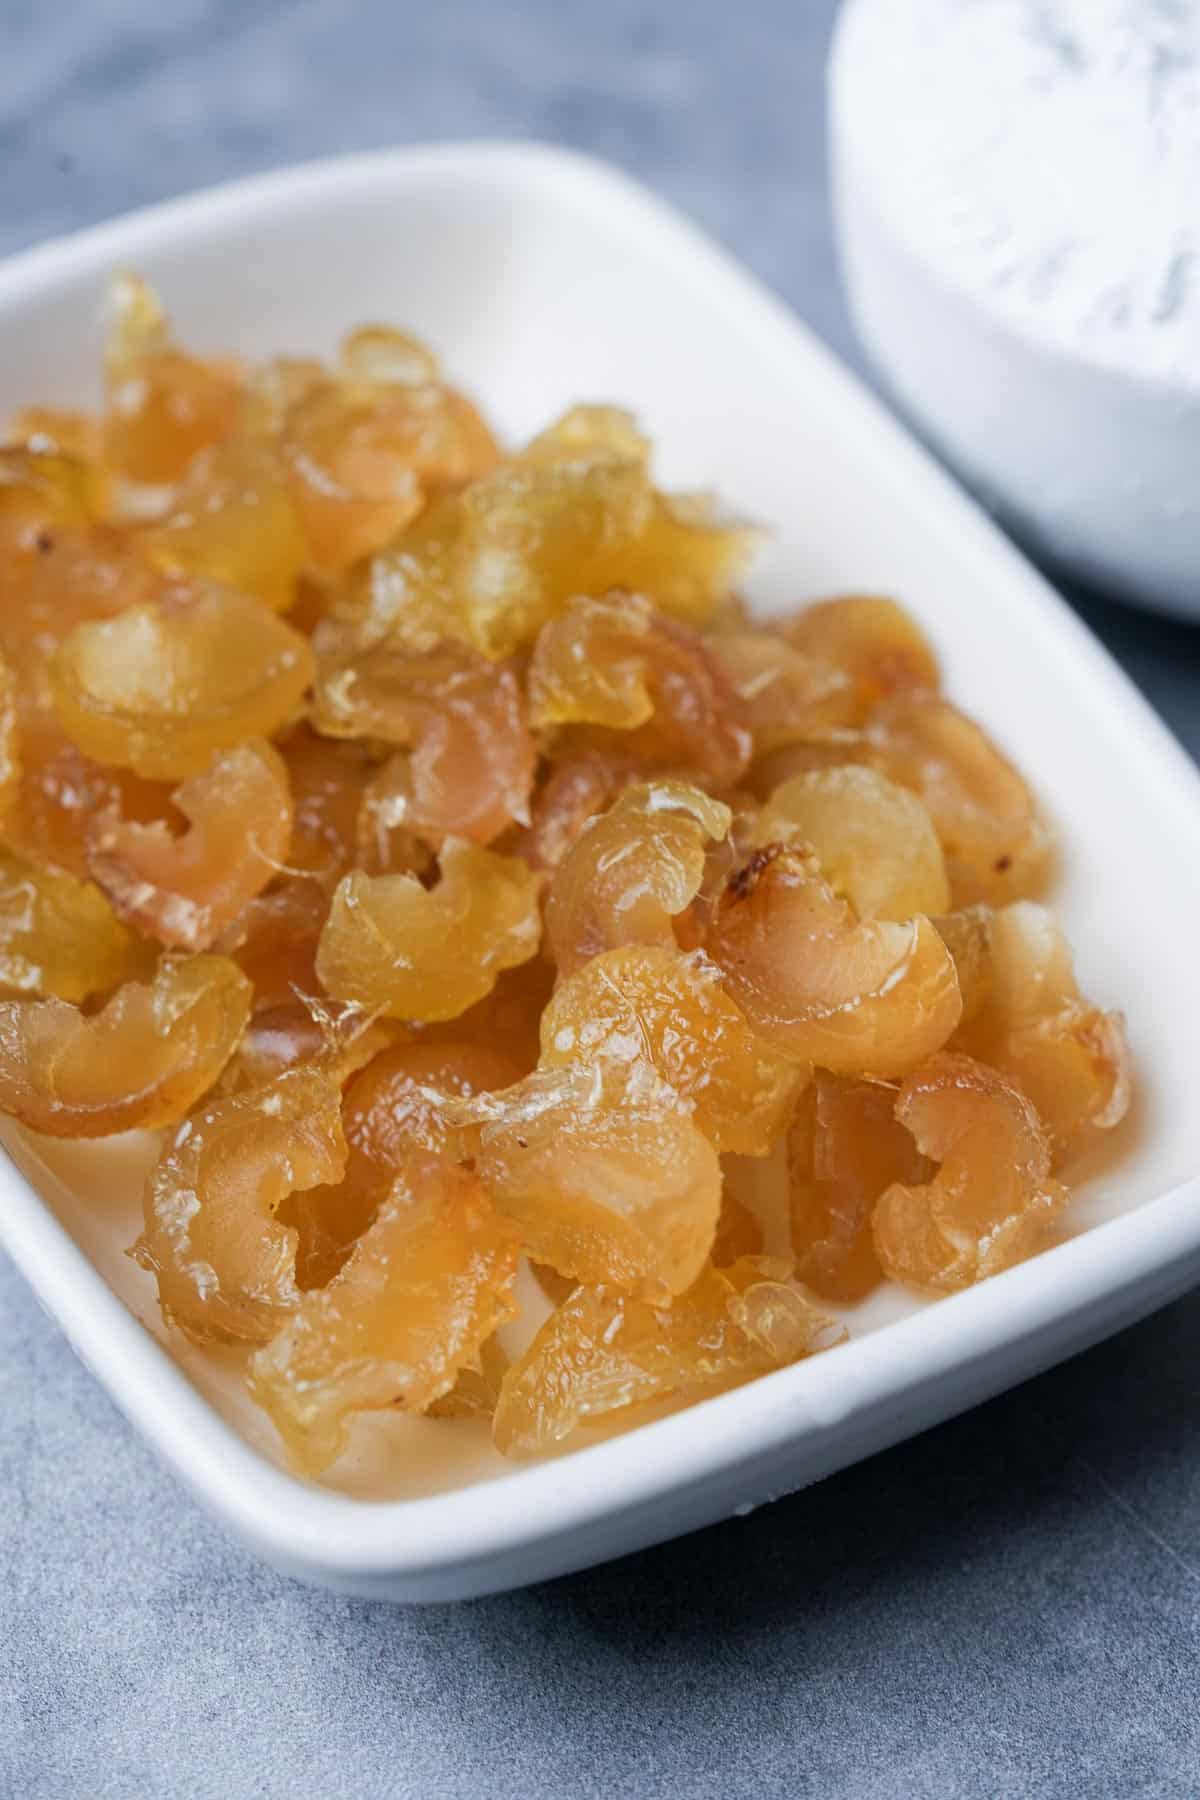 A white plate with a bowl of dried candied amla.